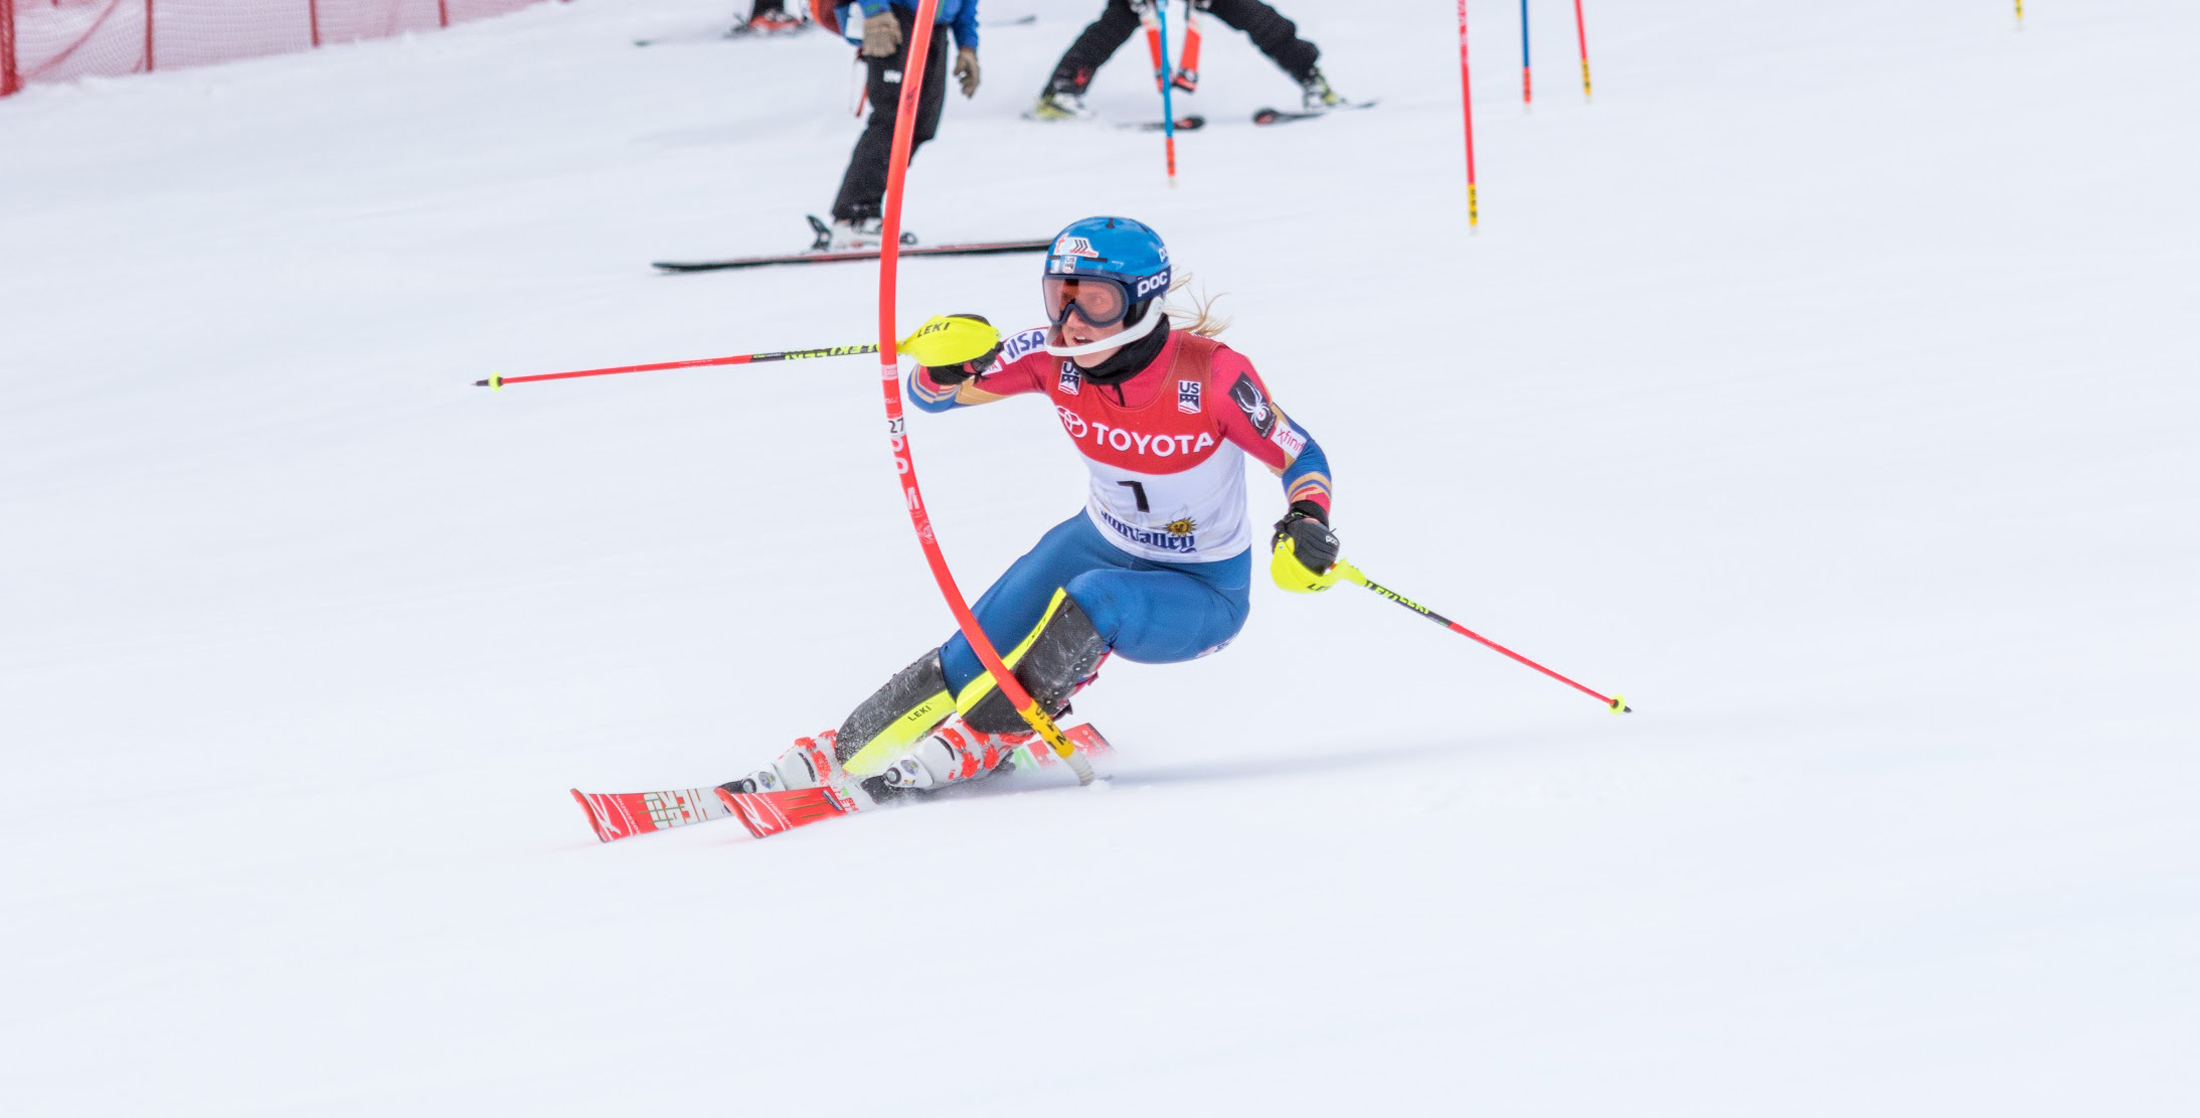 Nina O'Brien won her third U.S. National title in three separate disciplines with her slalom victory Saturday in Sun Valley, Idaho (Oliver @oliverguyphoto // Oliver Guy Photo)